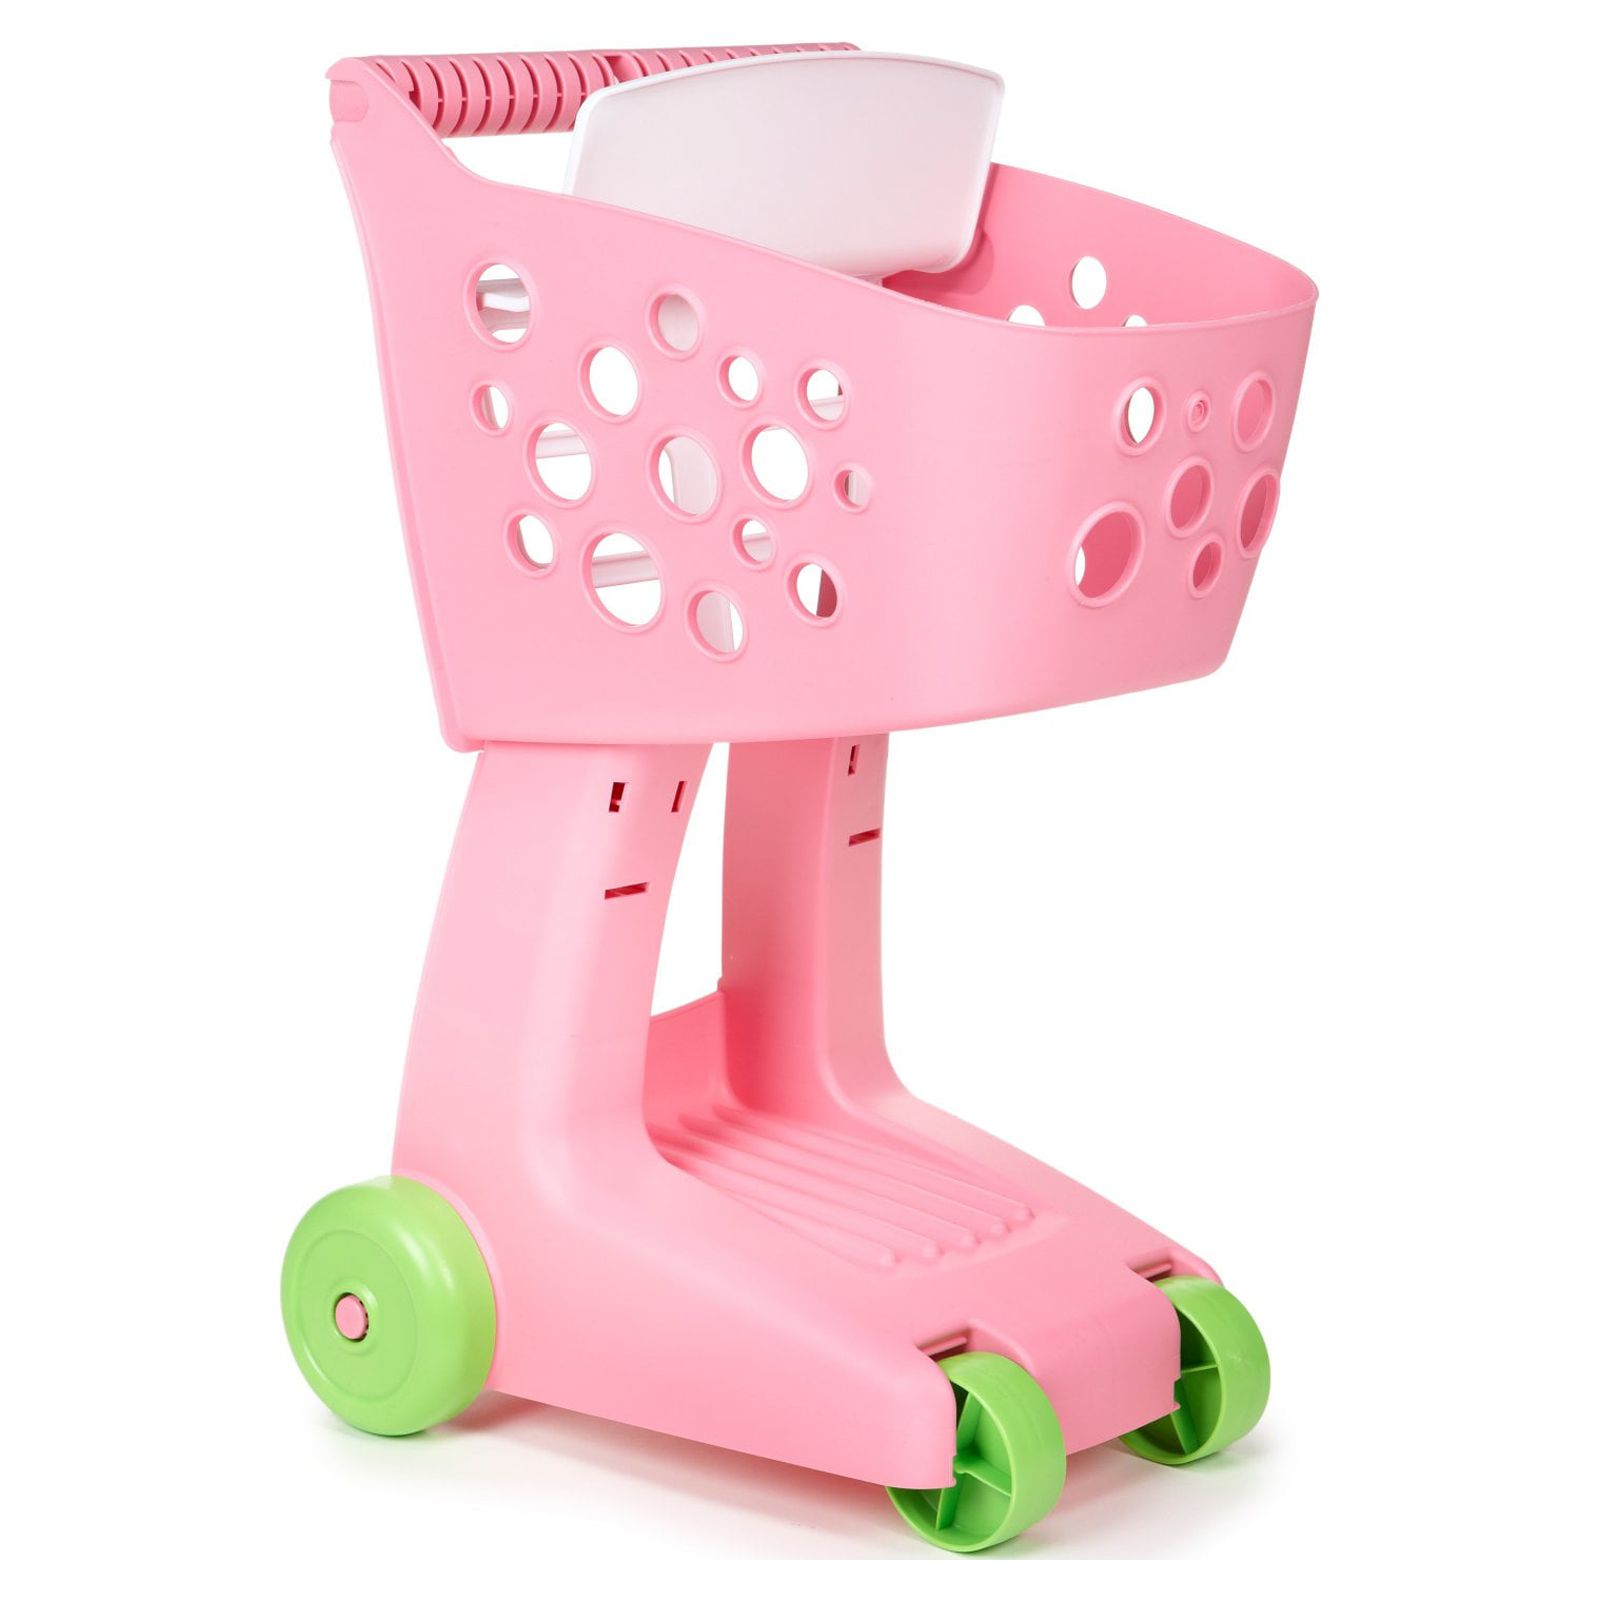 Little Tikes Lil Shopper - Pink For Girls and Boys Ages 1 Year + - image 4 of 7